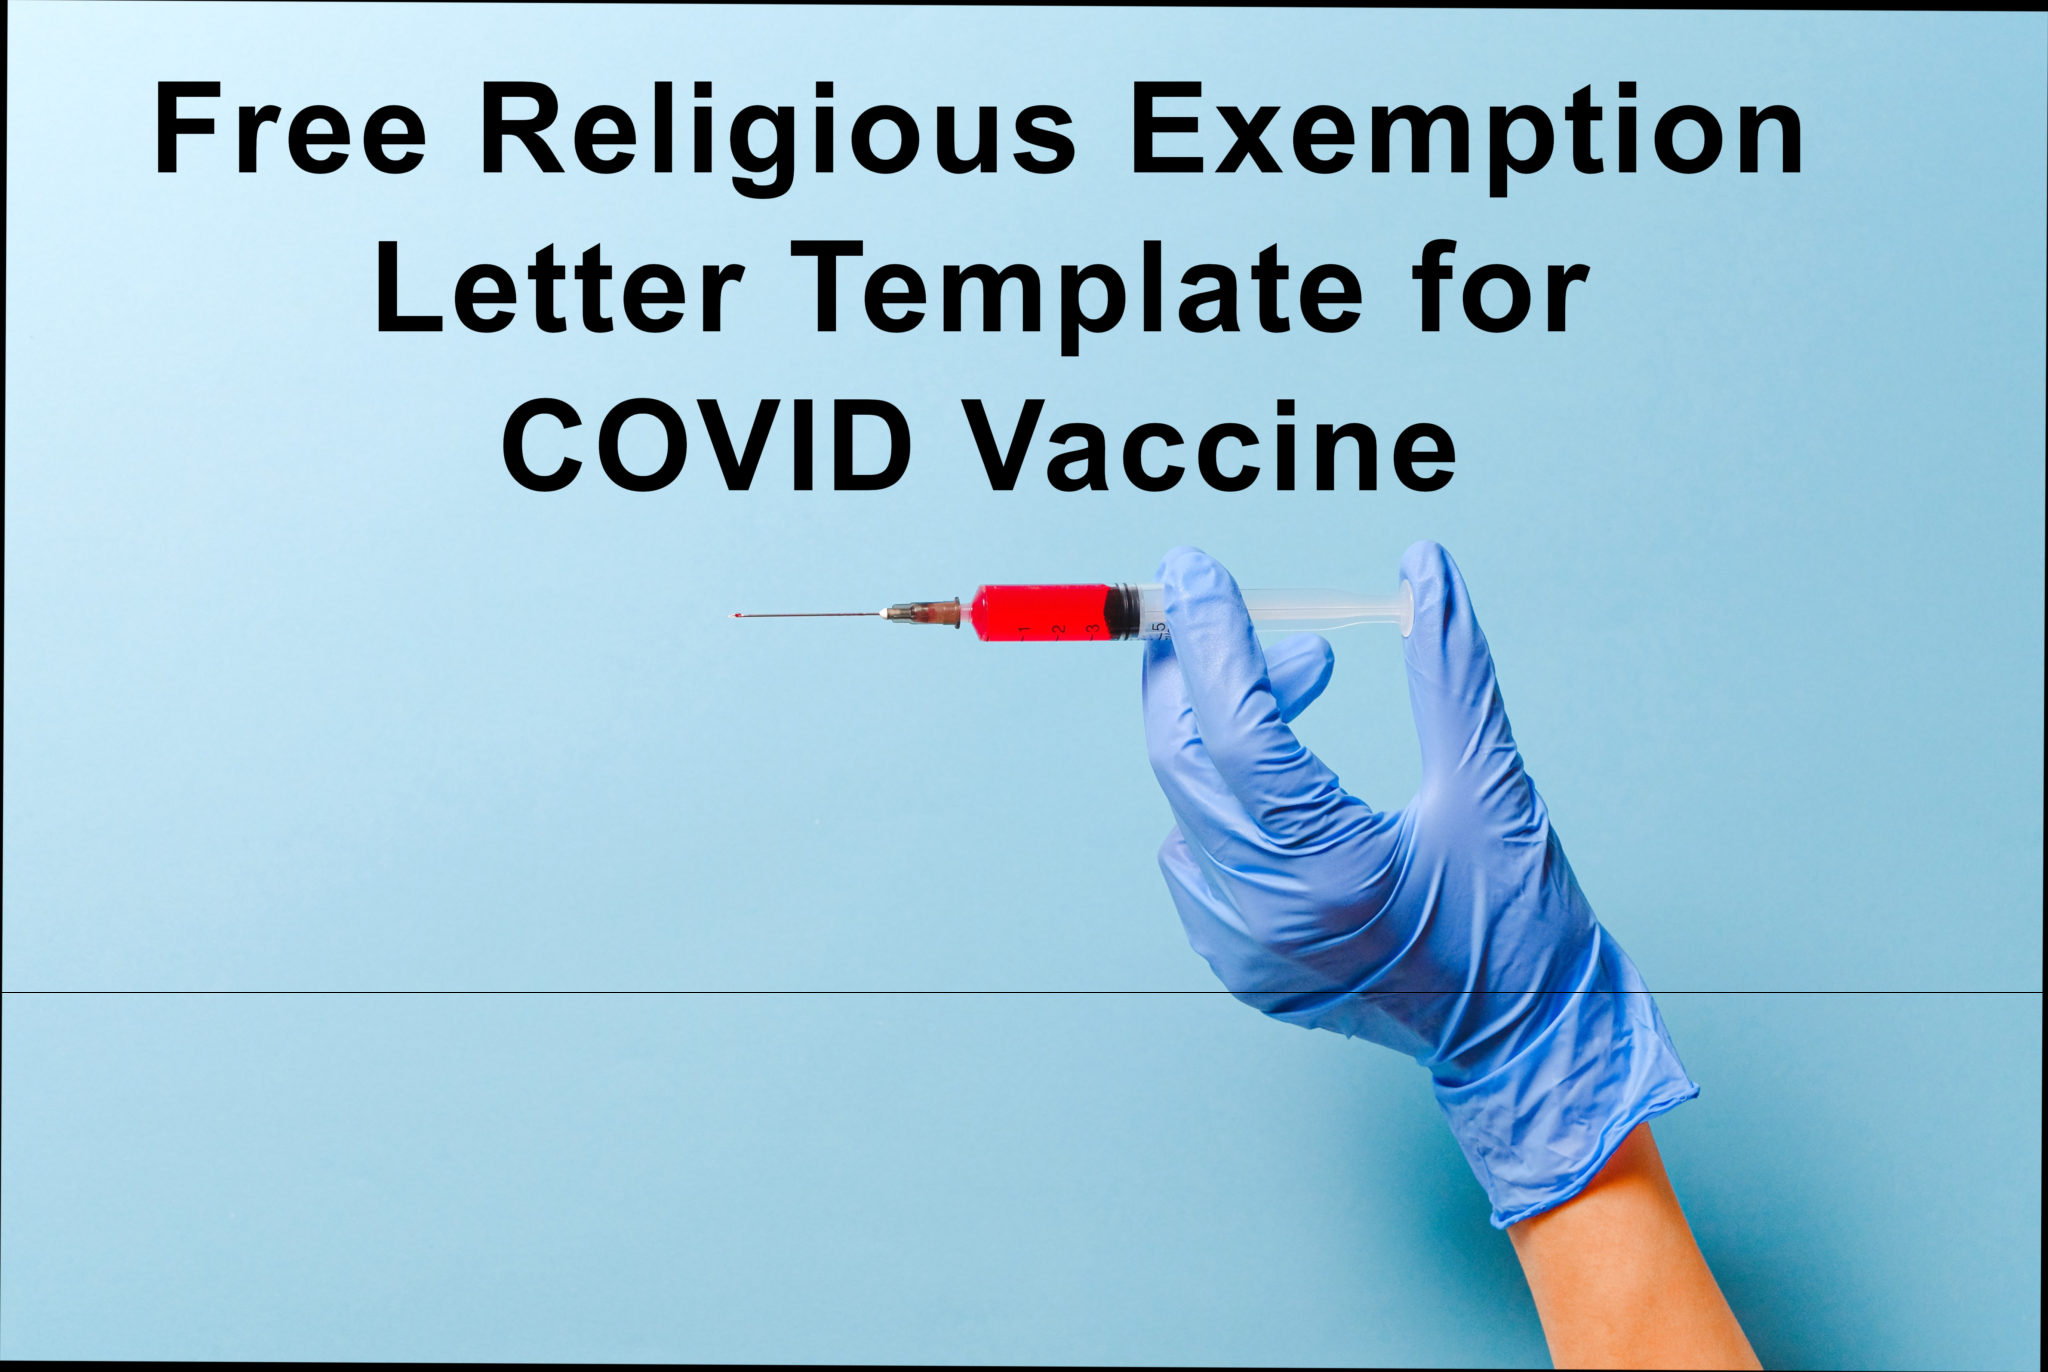 example letter of religious exemption for vaccinations